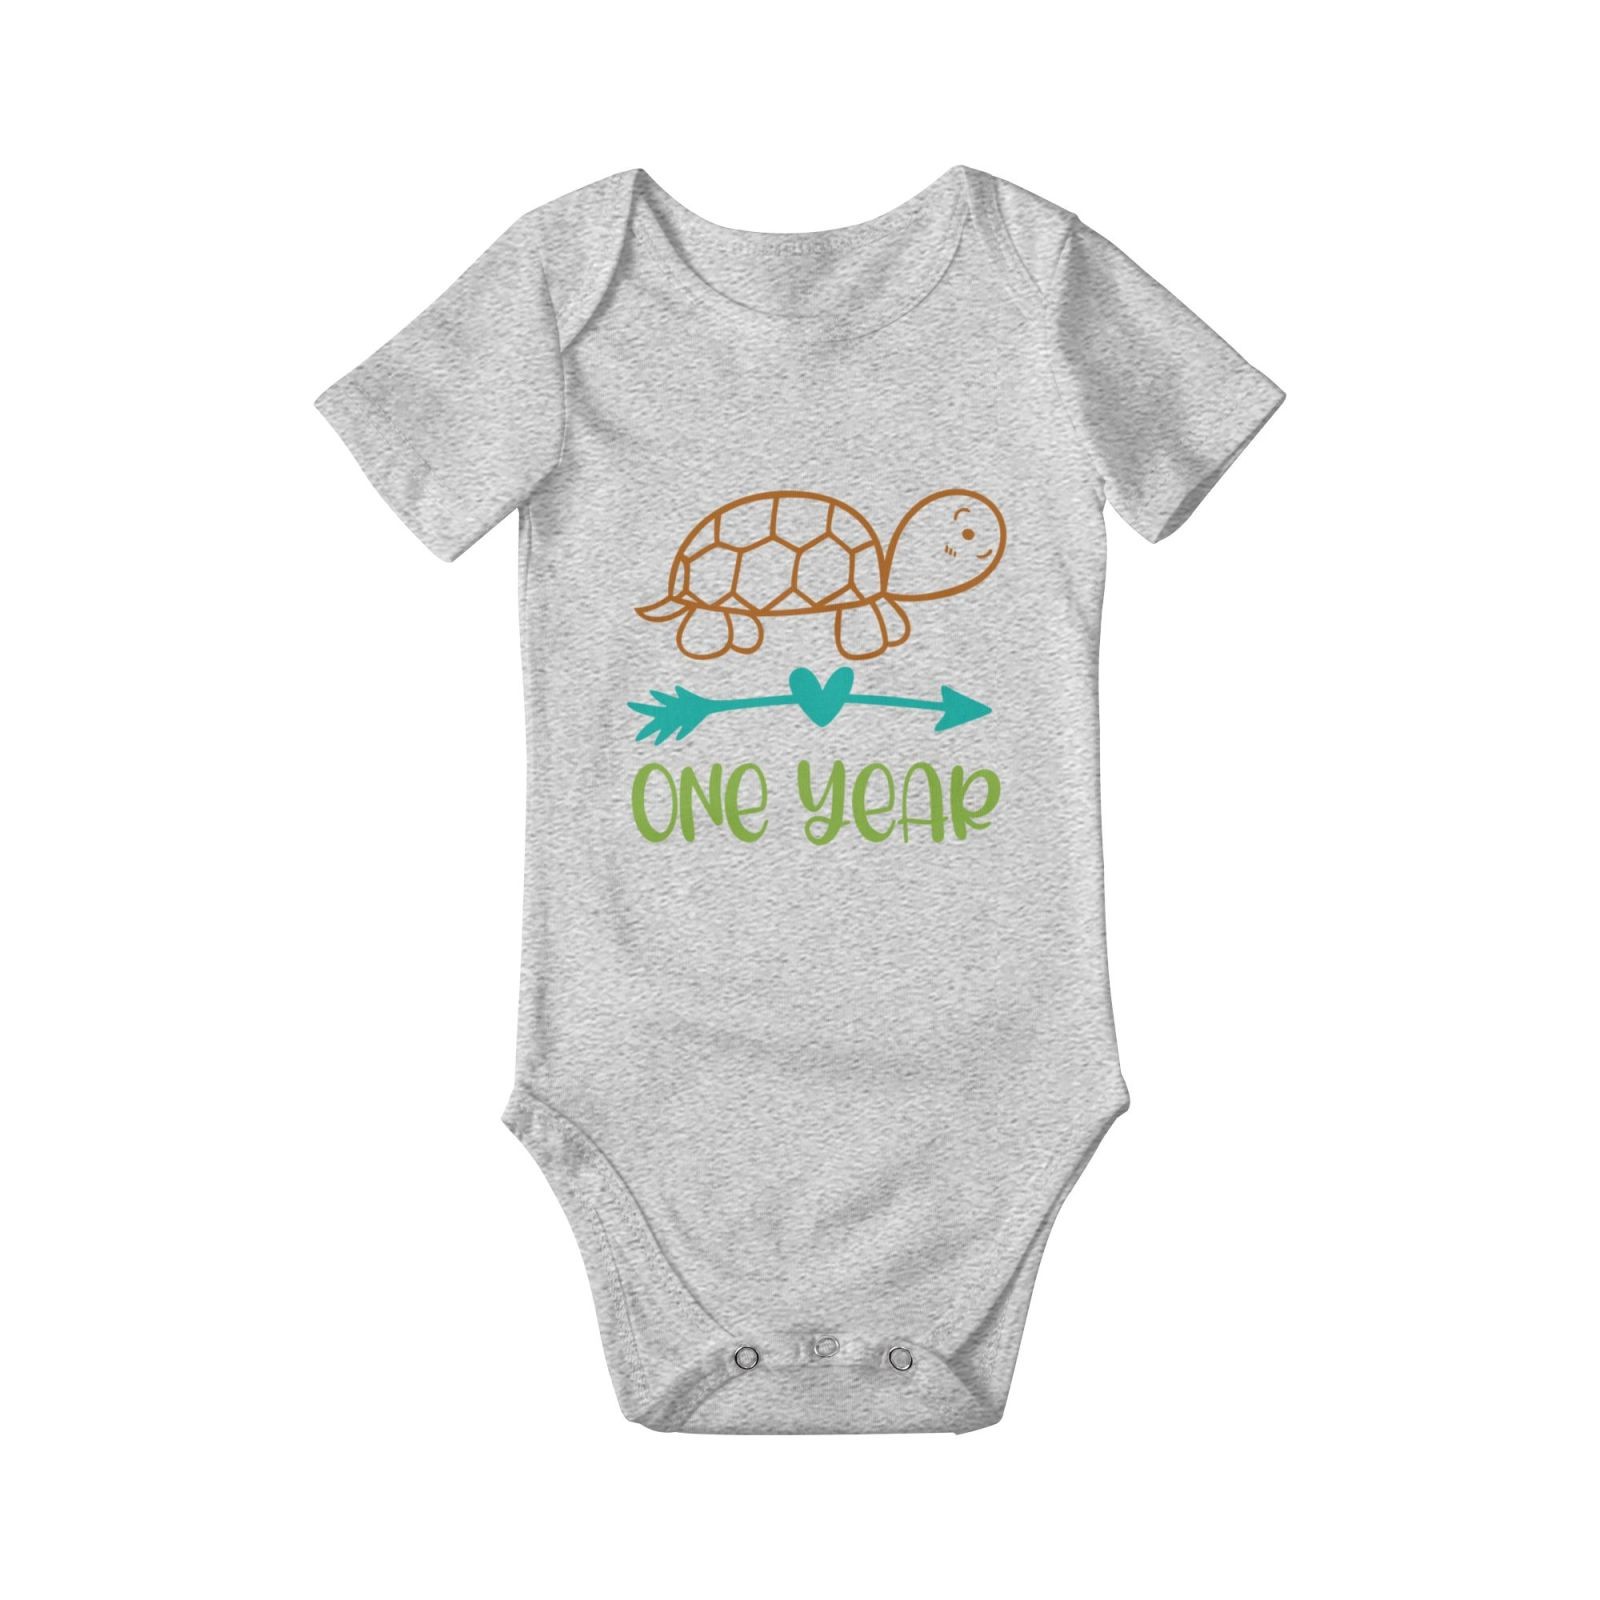 First Short Sleeve Baby Suit, Cotton Baby Suit, My 1st Mother's Day/Father's Day/Birthday Baby Suit, Gift for Babies